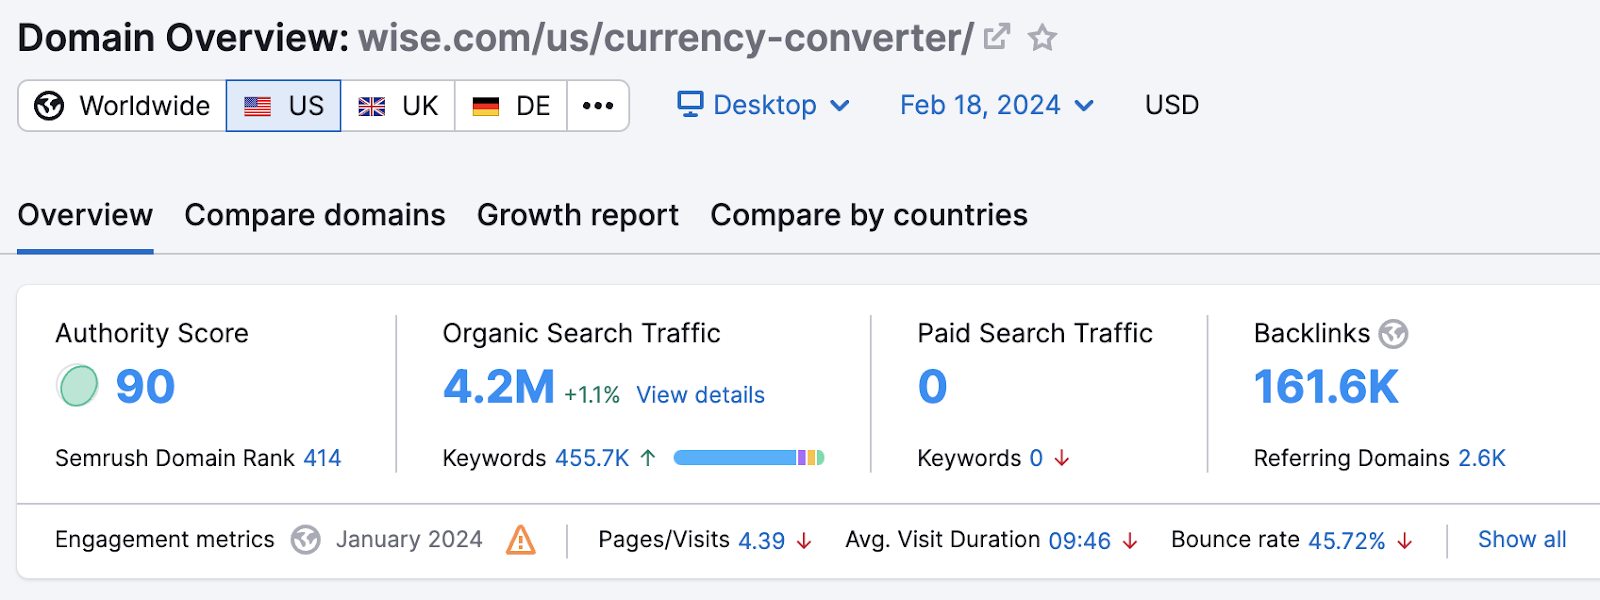 Organic search traffic data shown for Wise's currency converter page